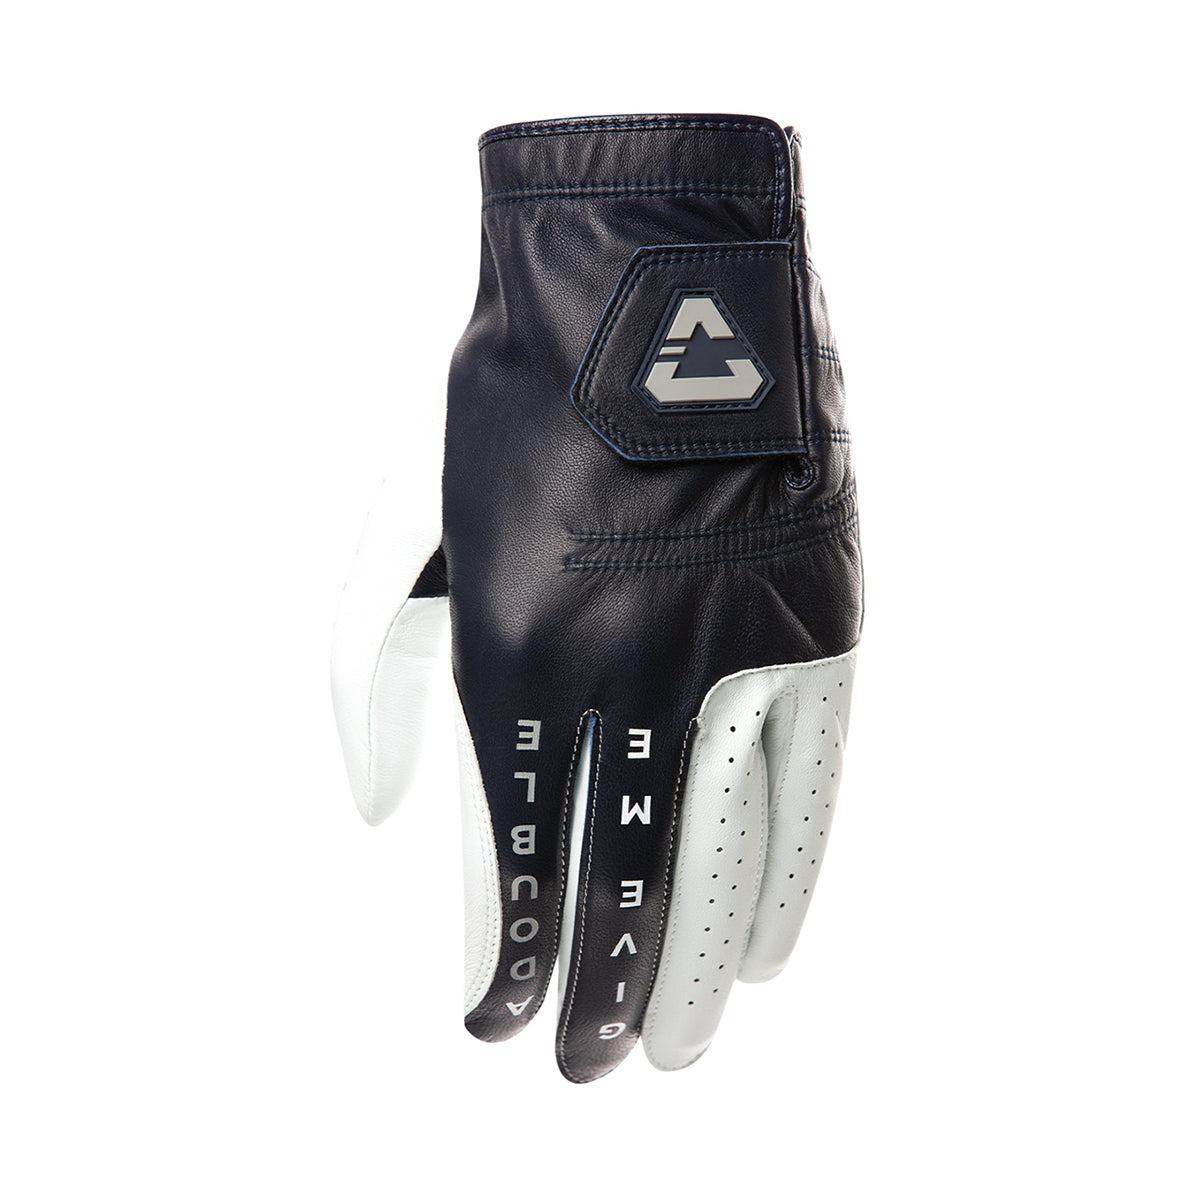 cuater-golf-double-me-glove-mlh-4mt075-blue-nights